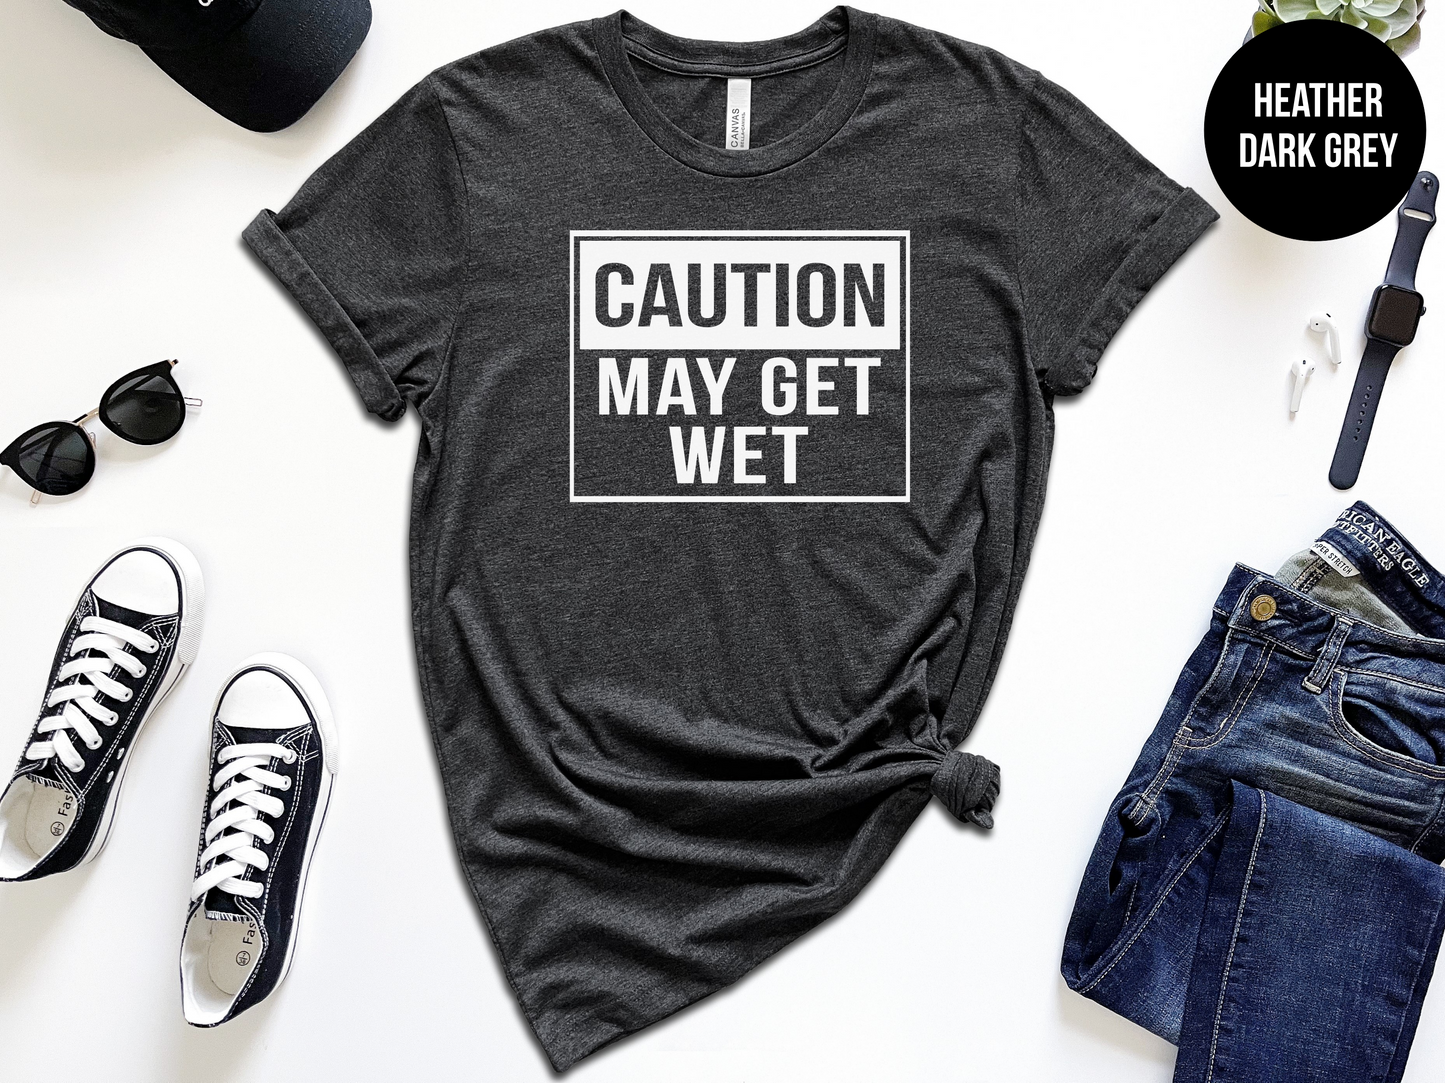 Caution: May Get Wet